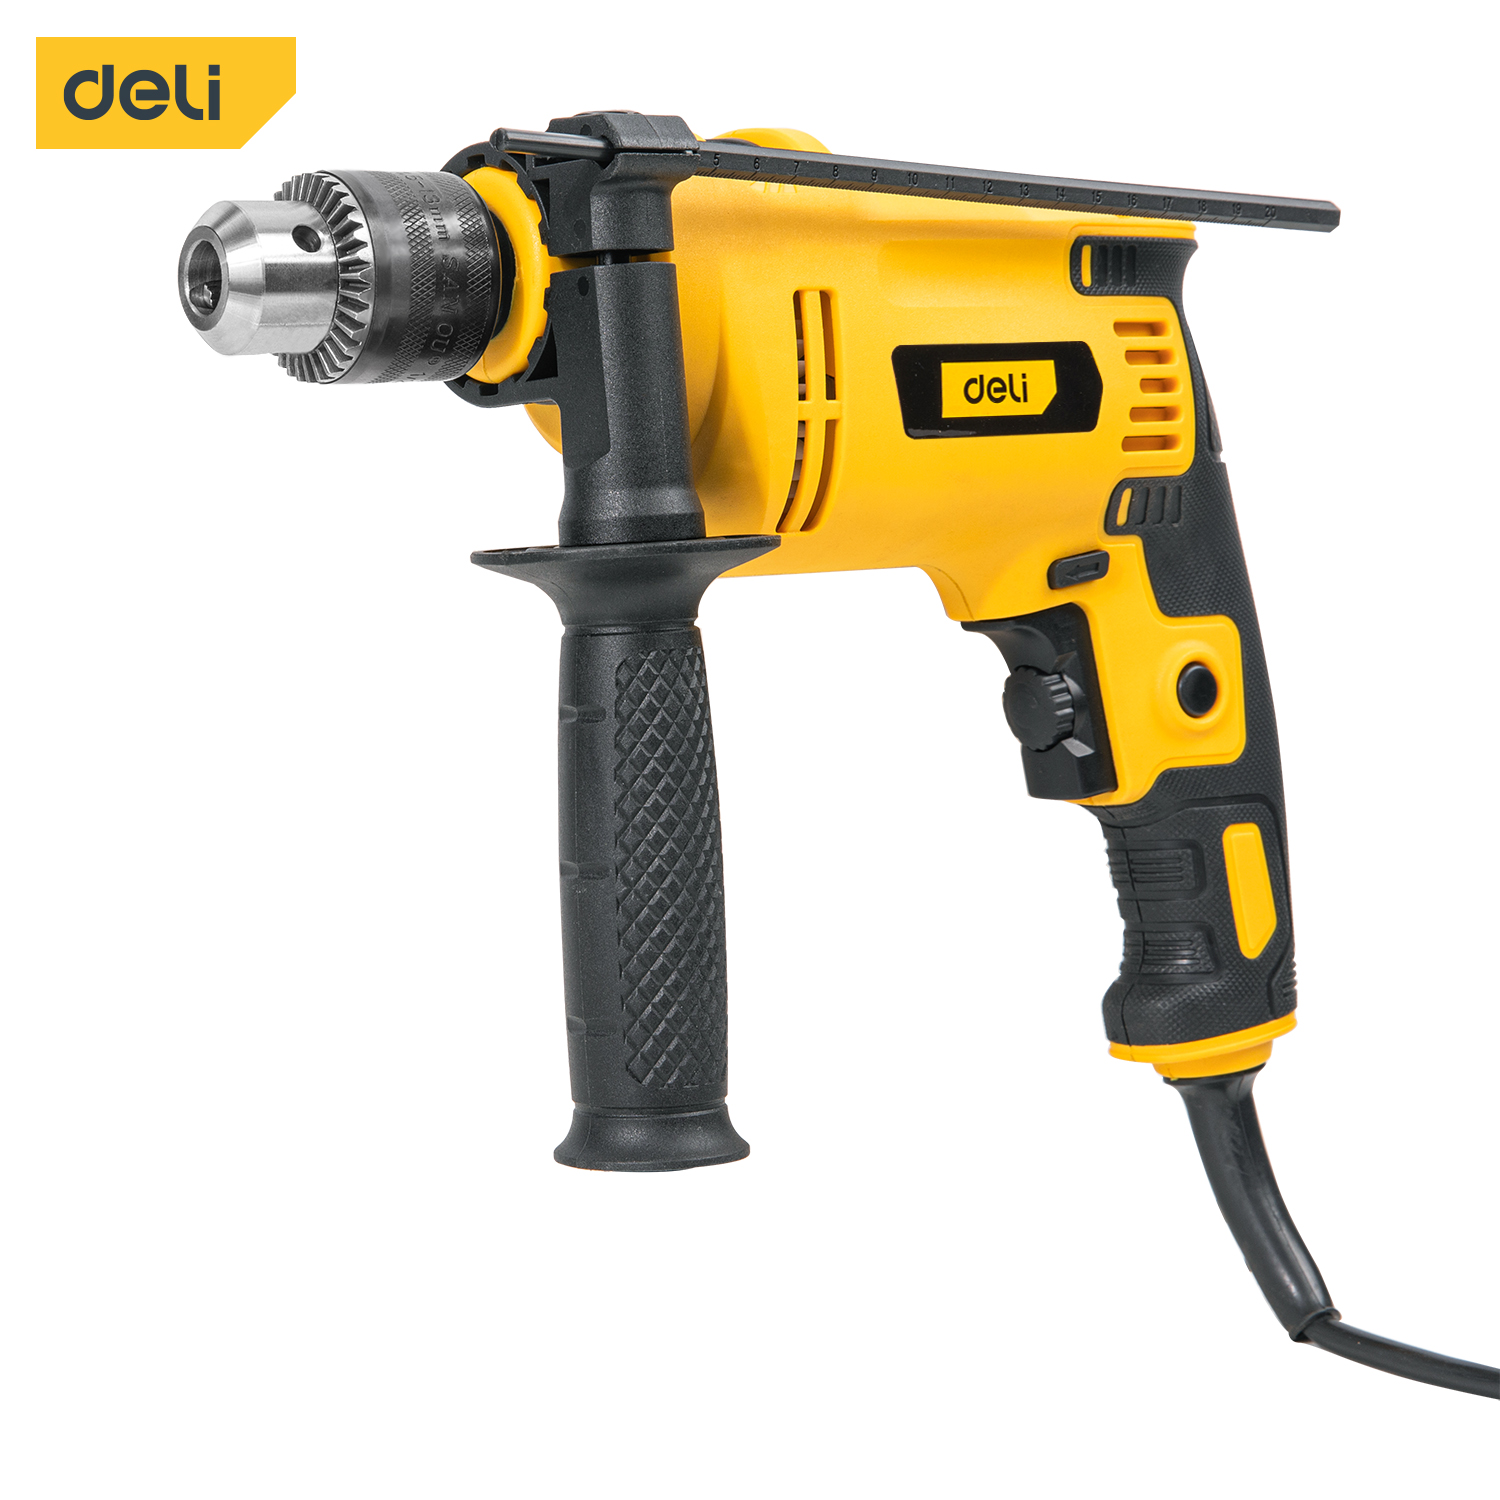 Portable electric drill with light for screws